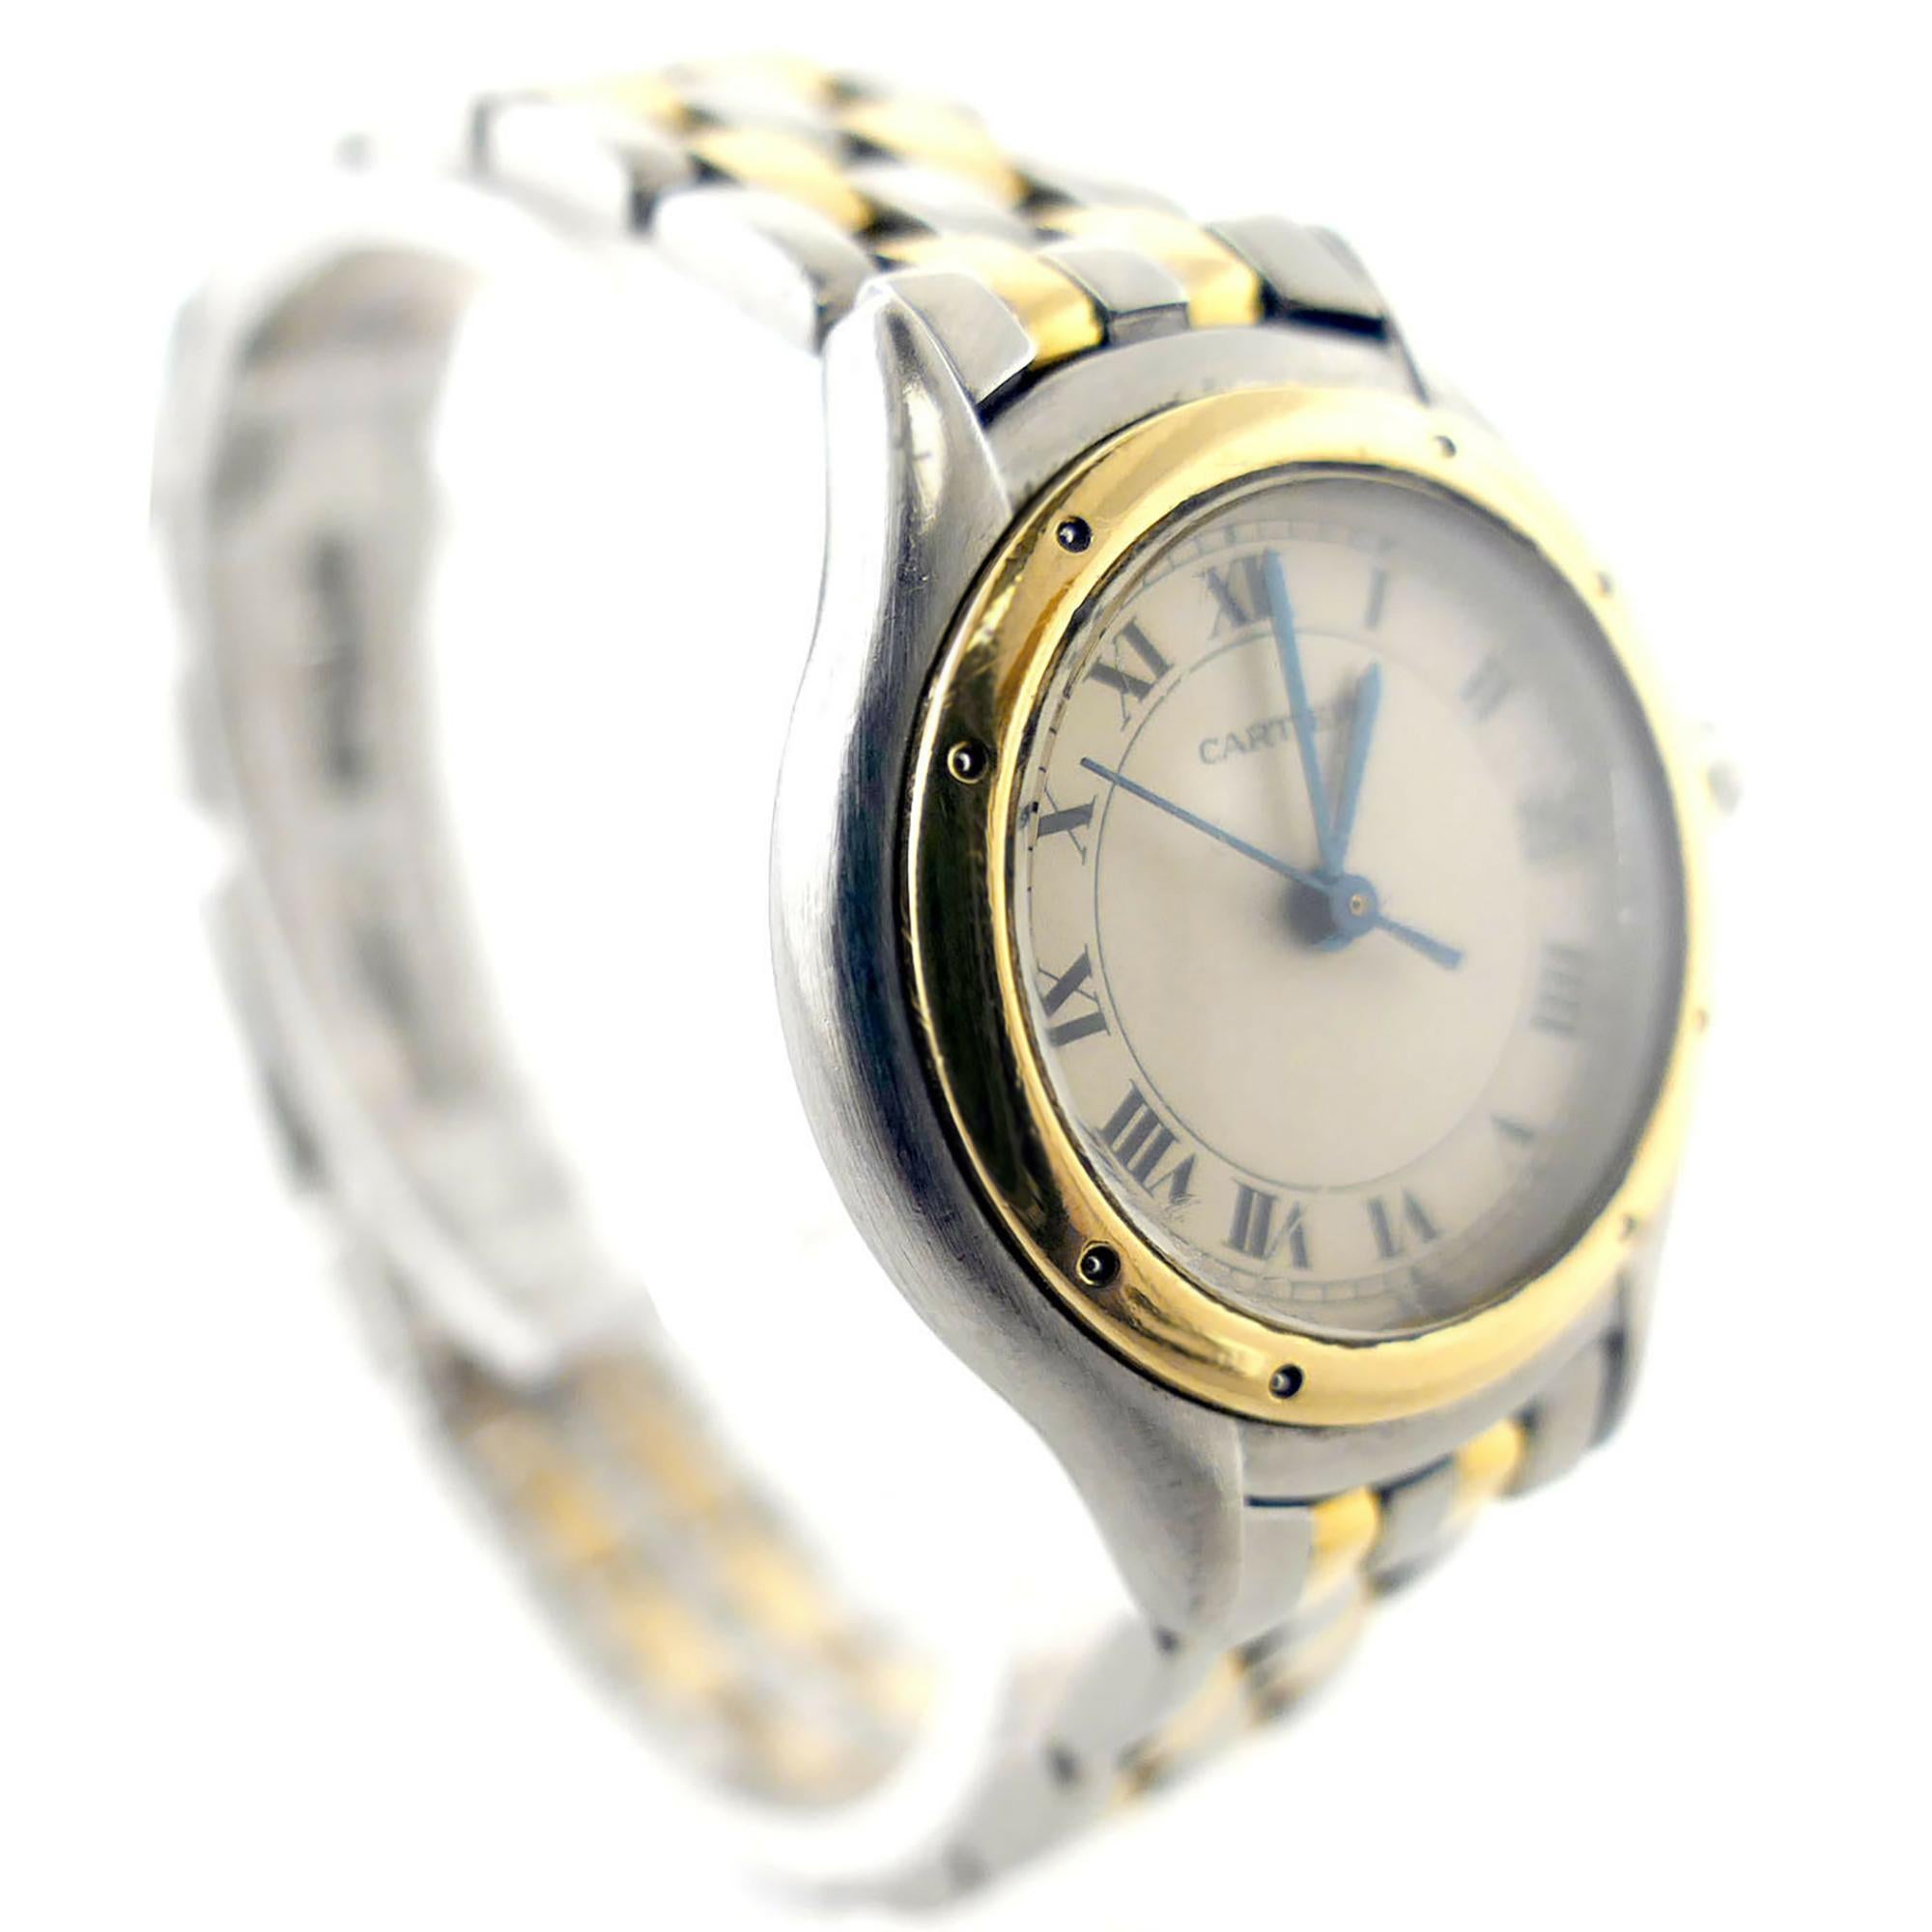 Cartier Yellow Gold and Stainless Steel Women's Watch. Water resistant up to 30mm

Serial # 187906 003203 
ref# W35006